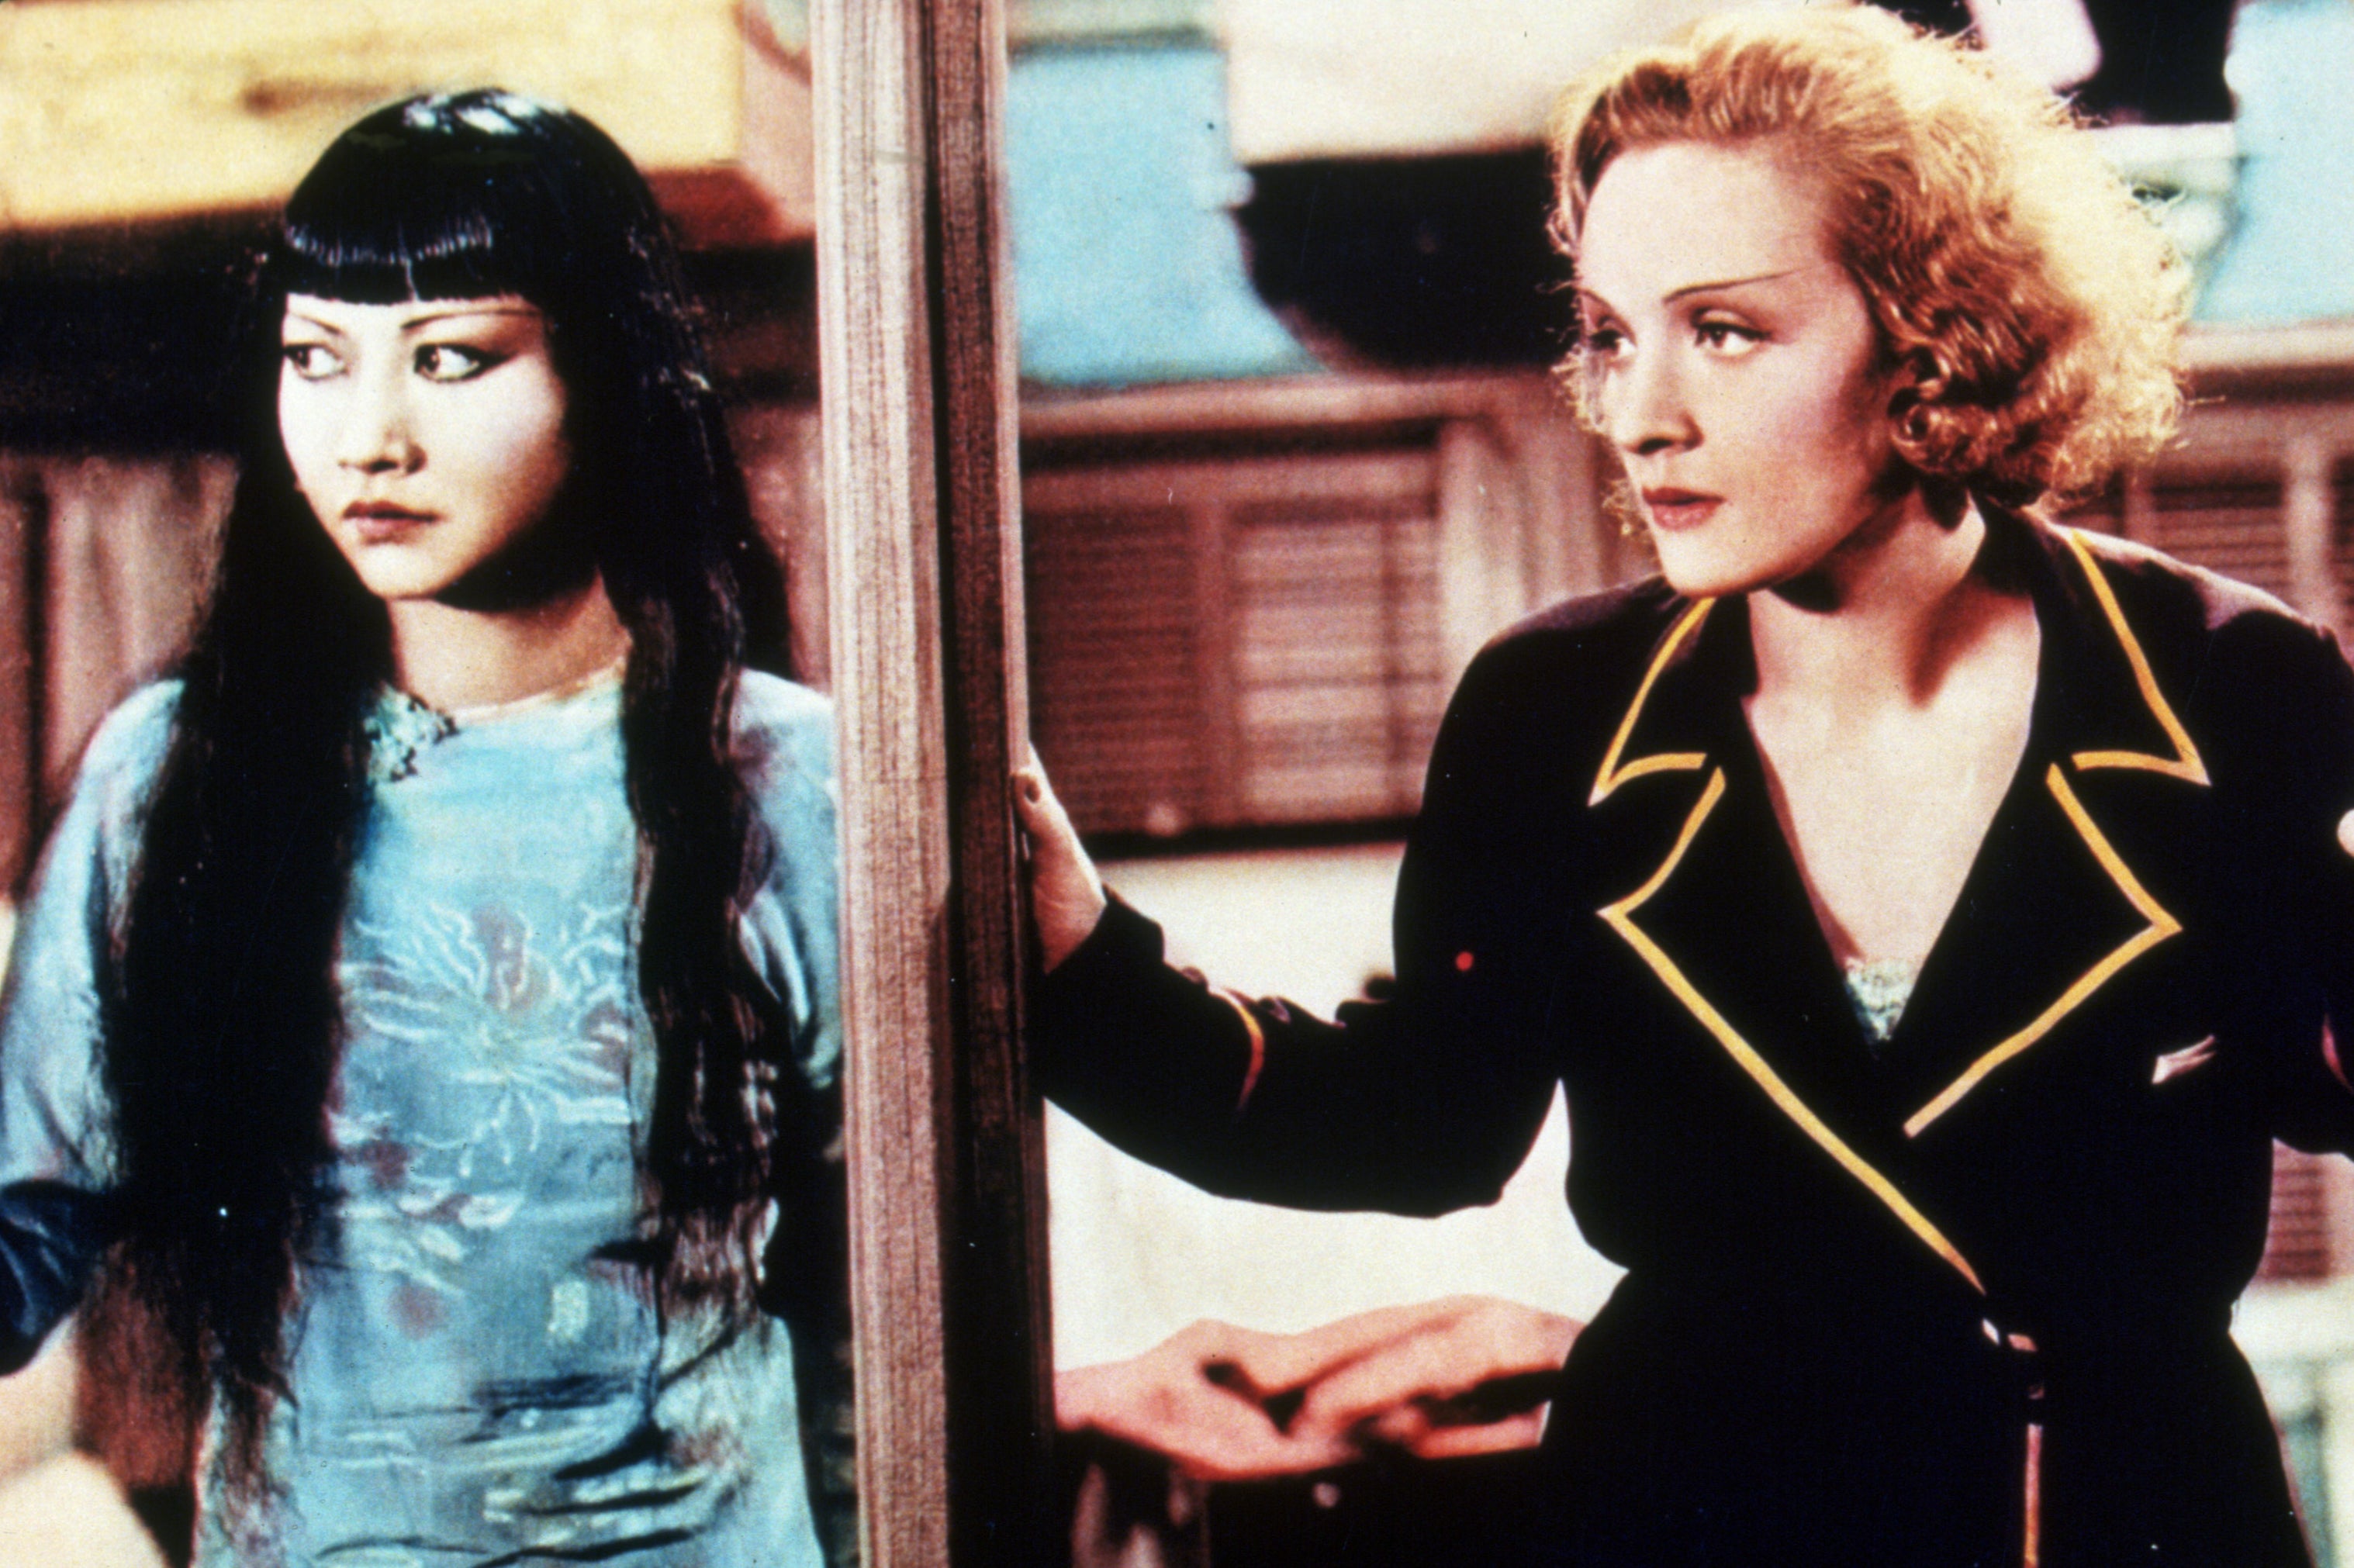 The stuff of legend: Wong and Marlene Dietrich in ‘Shanghai Express’